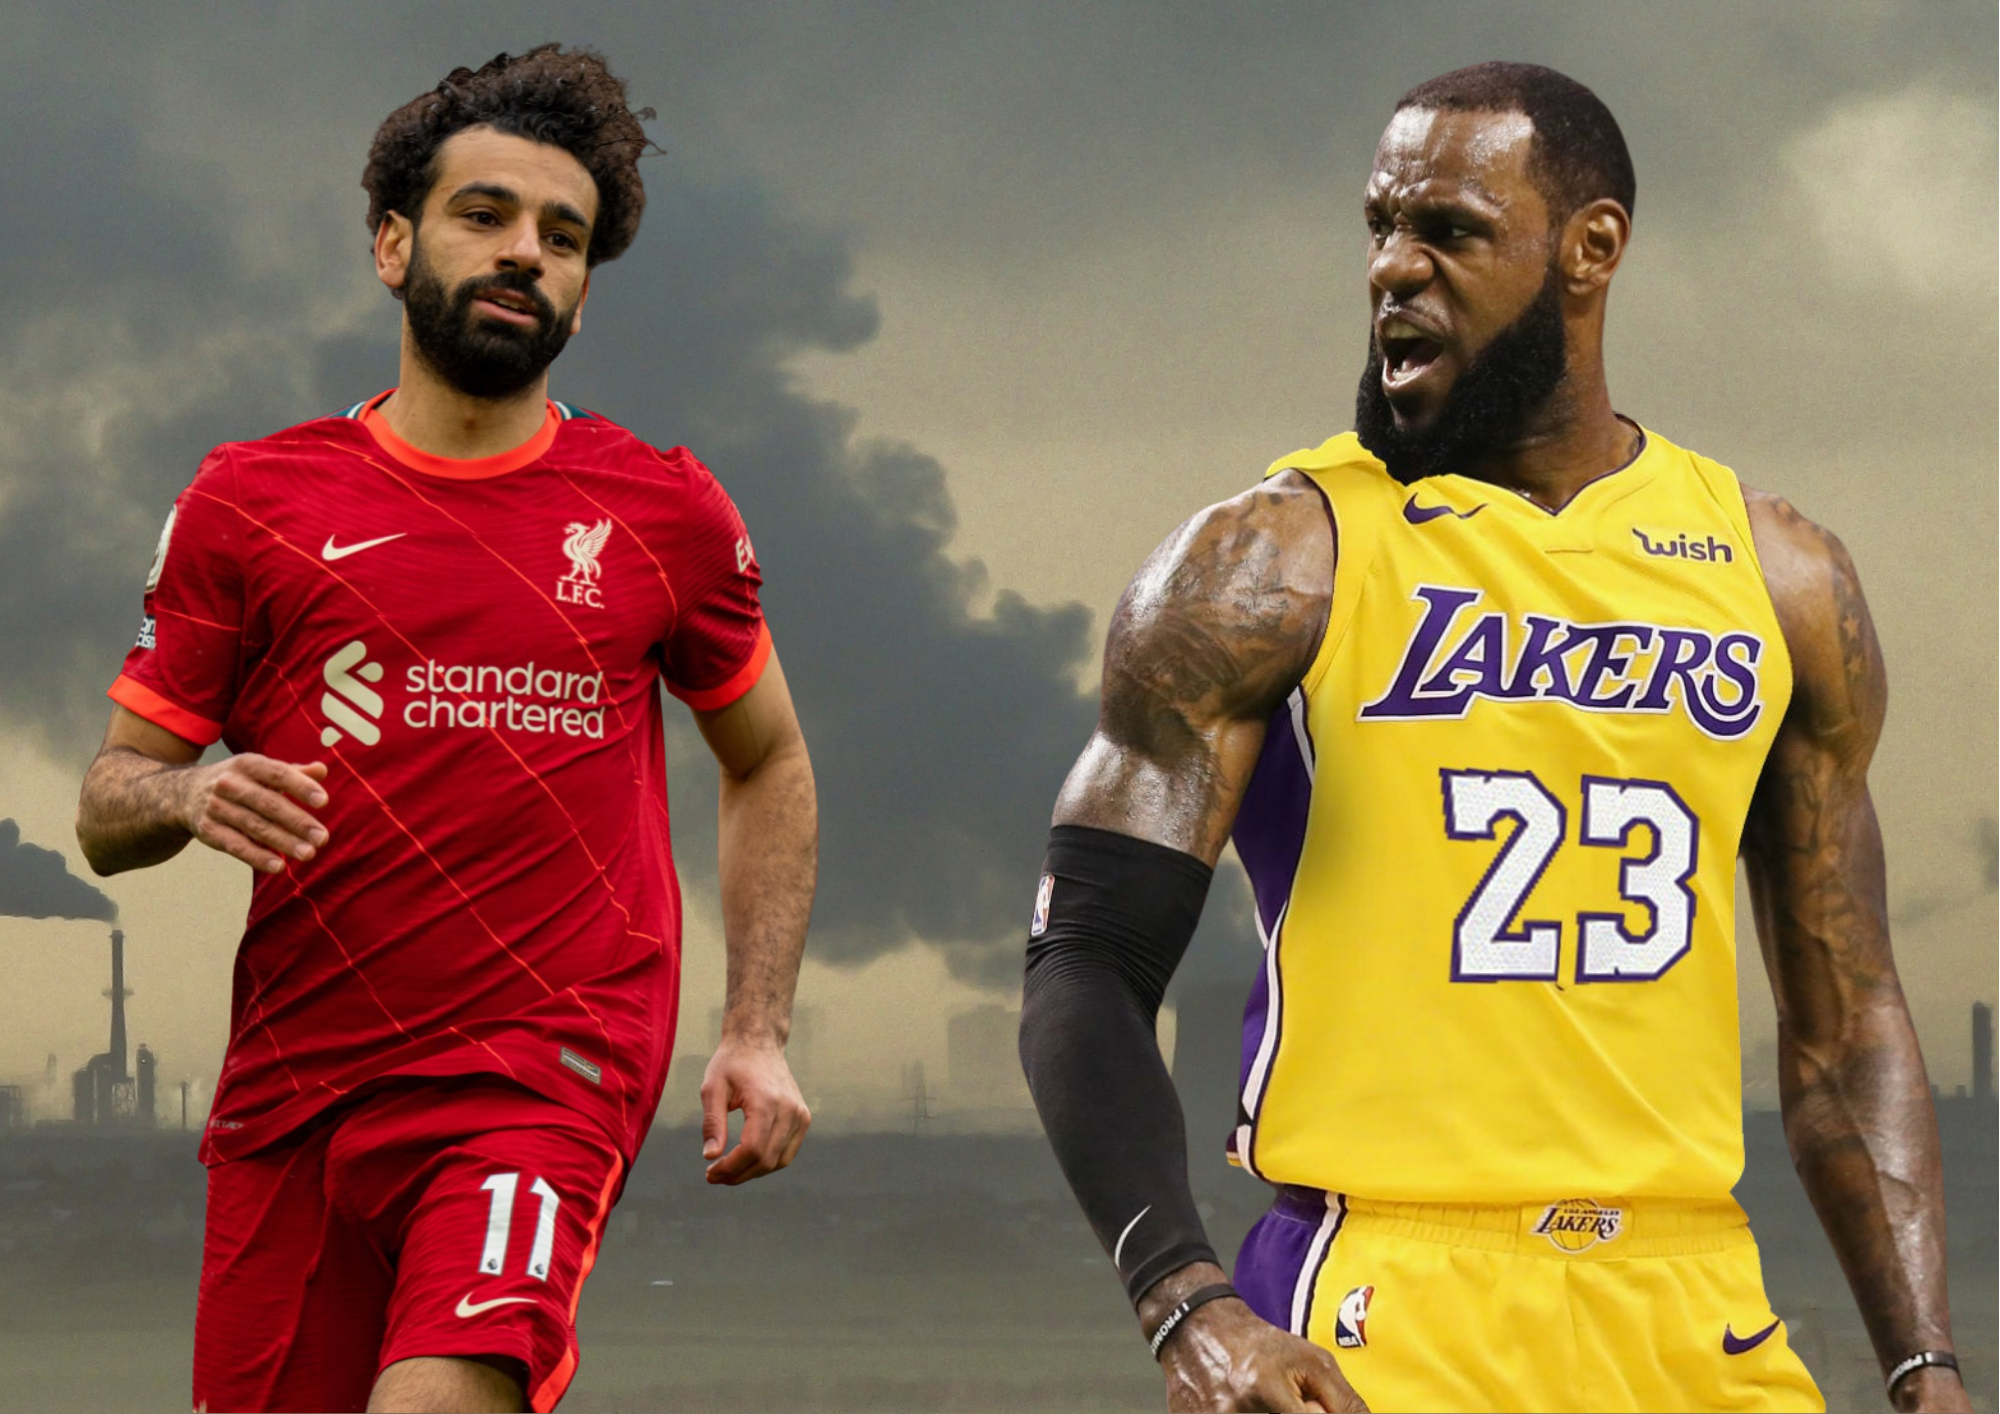 LeBron James proves the star power of Liverpool's new Nike kit